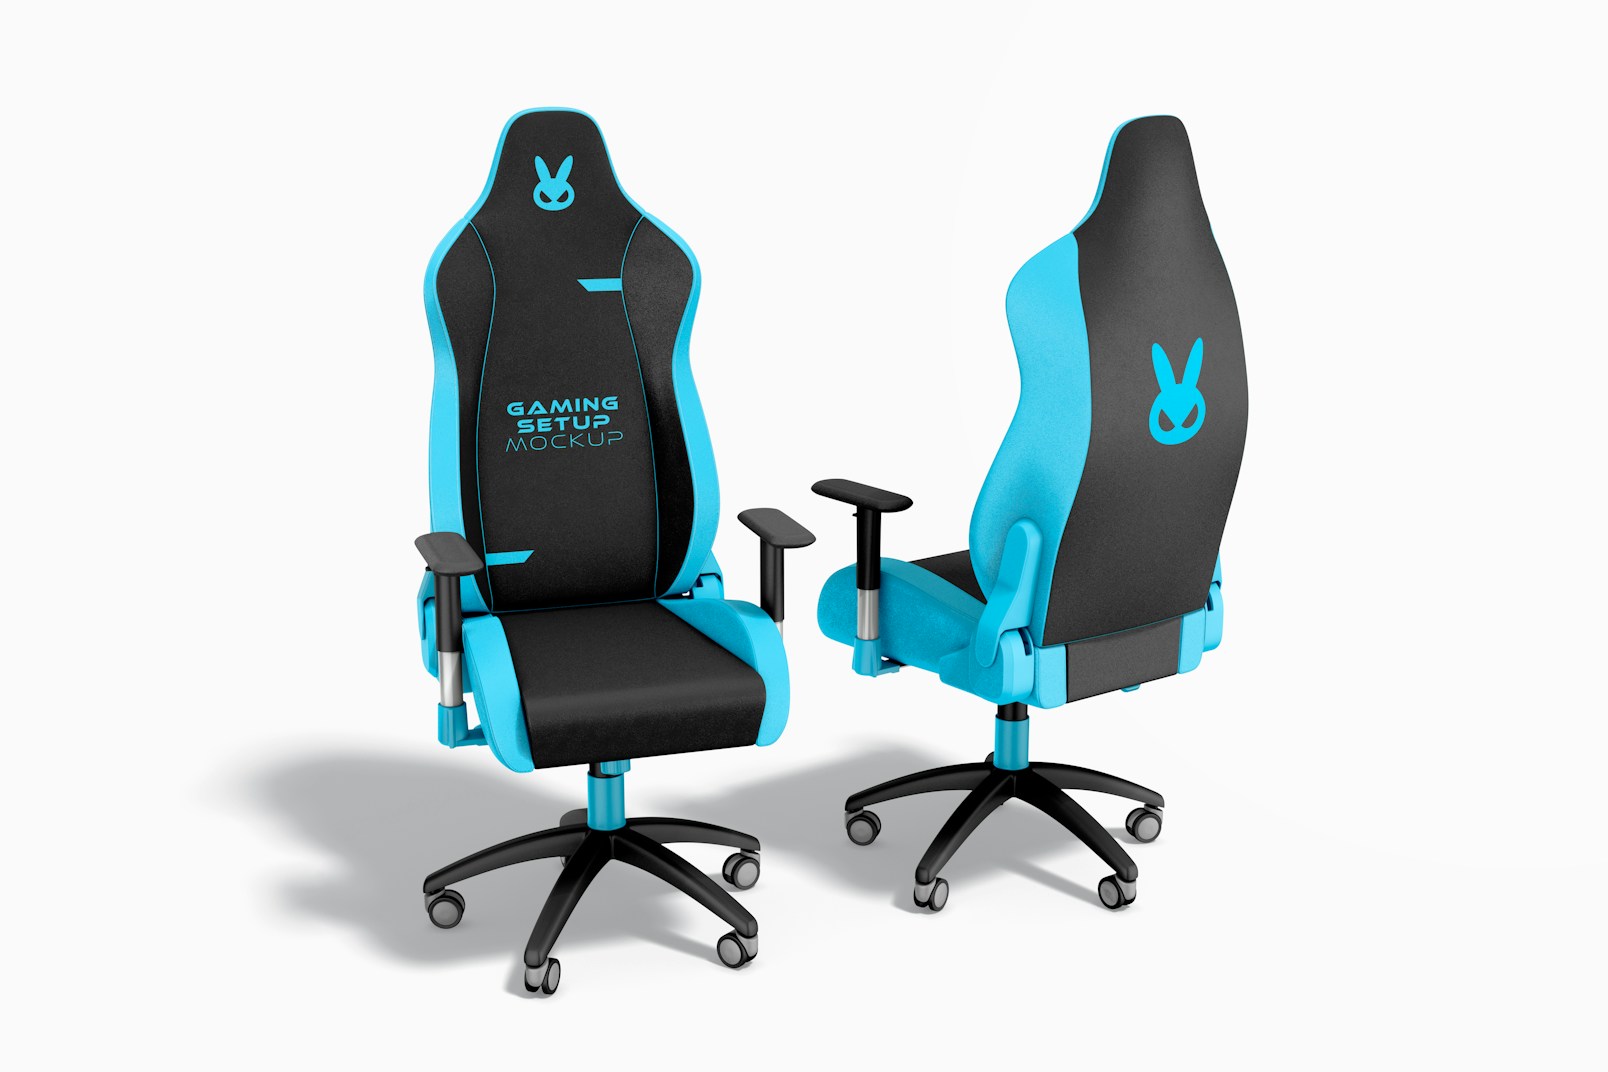 Gaming Chair Mockup, Front and Back View